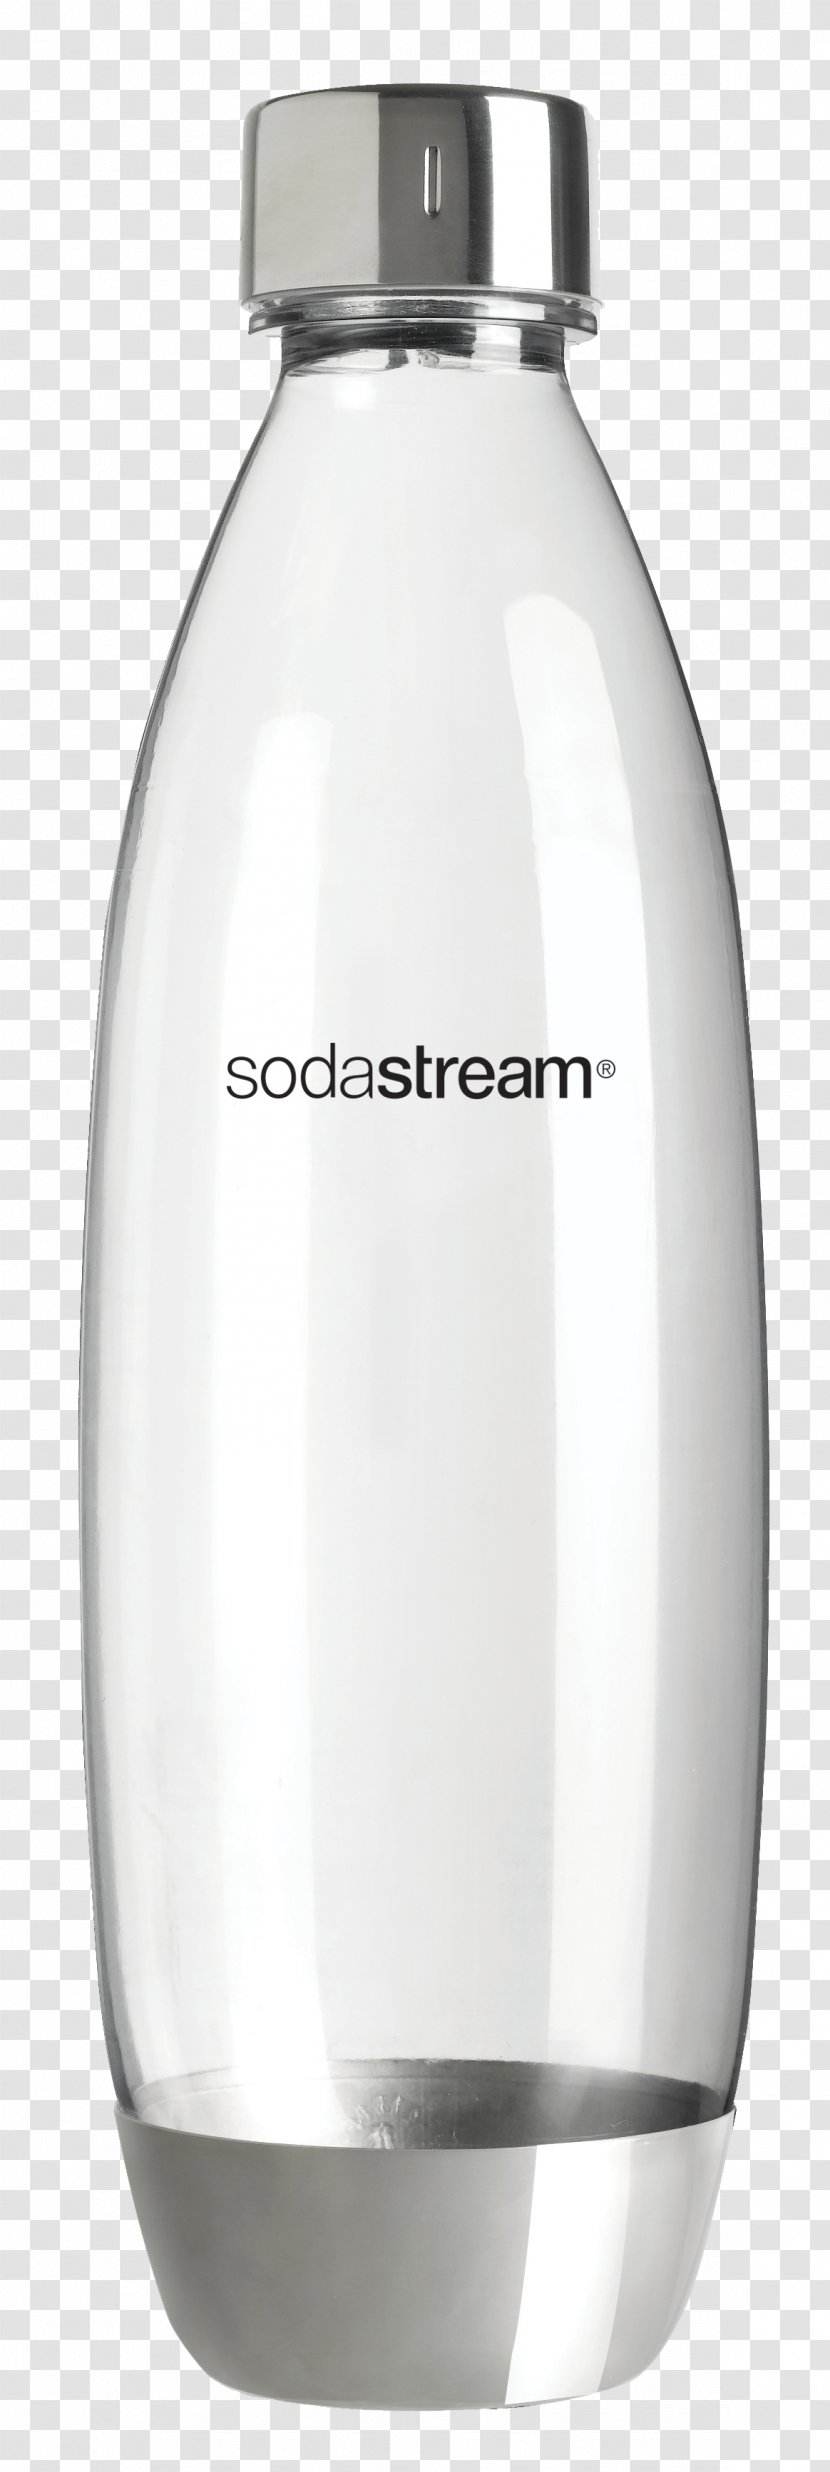 Carbonated Water Fizzy Drinks SodaStream Carbonating Bottles - Bottle - Aluminium Flask Transparent PNG